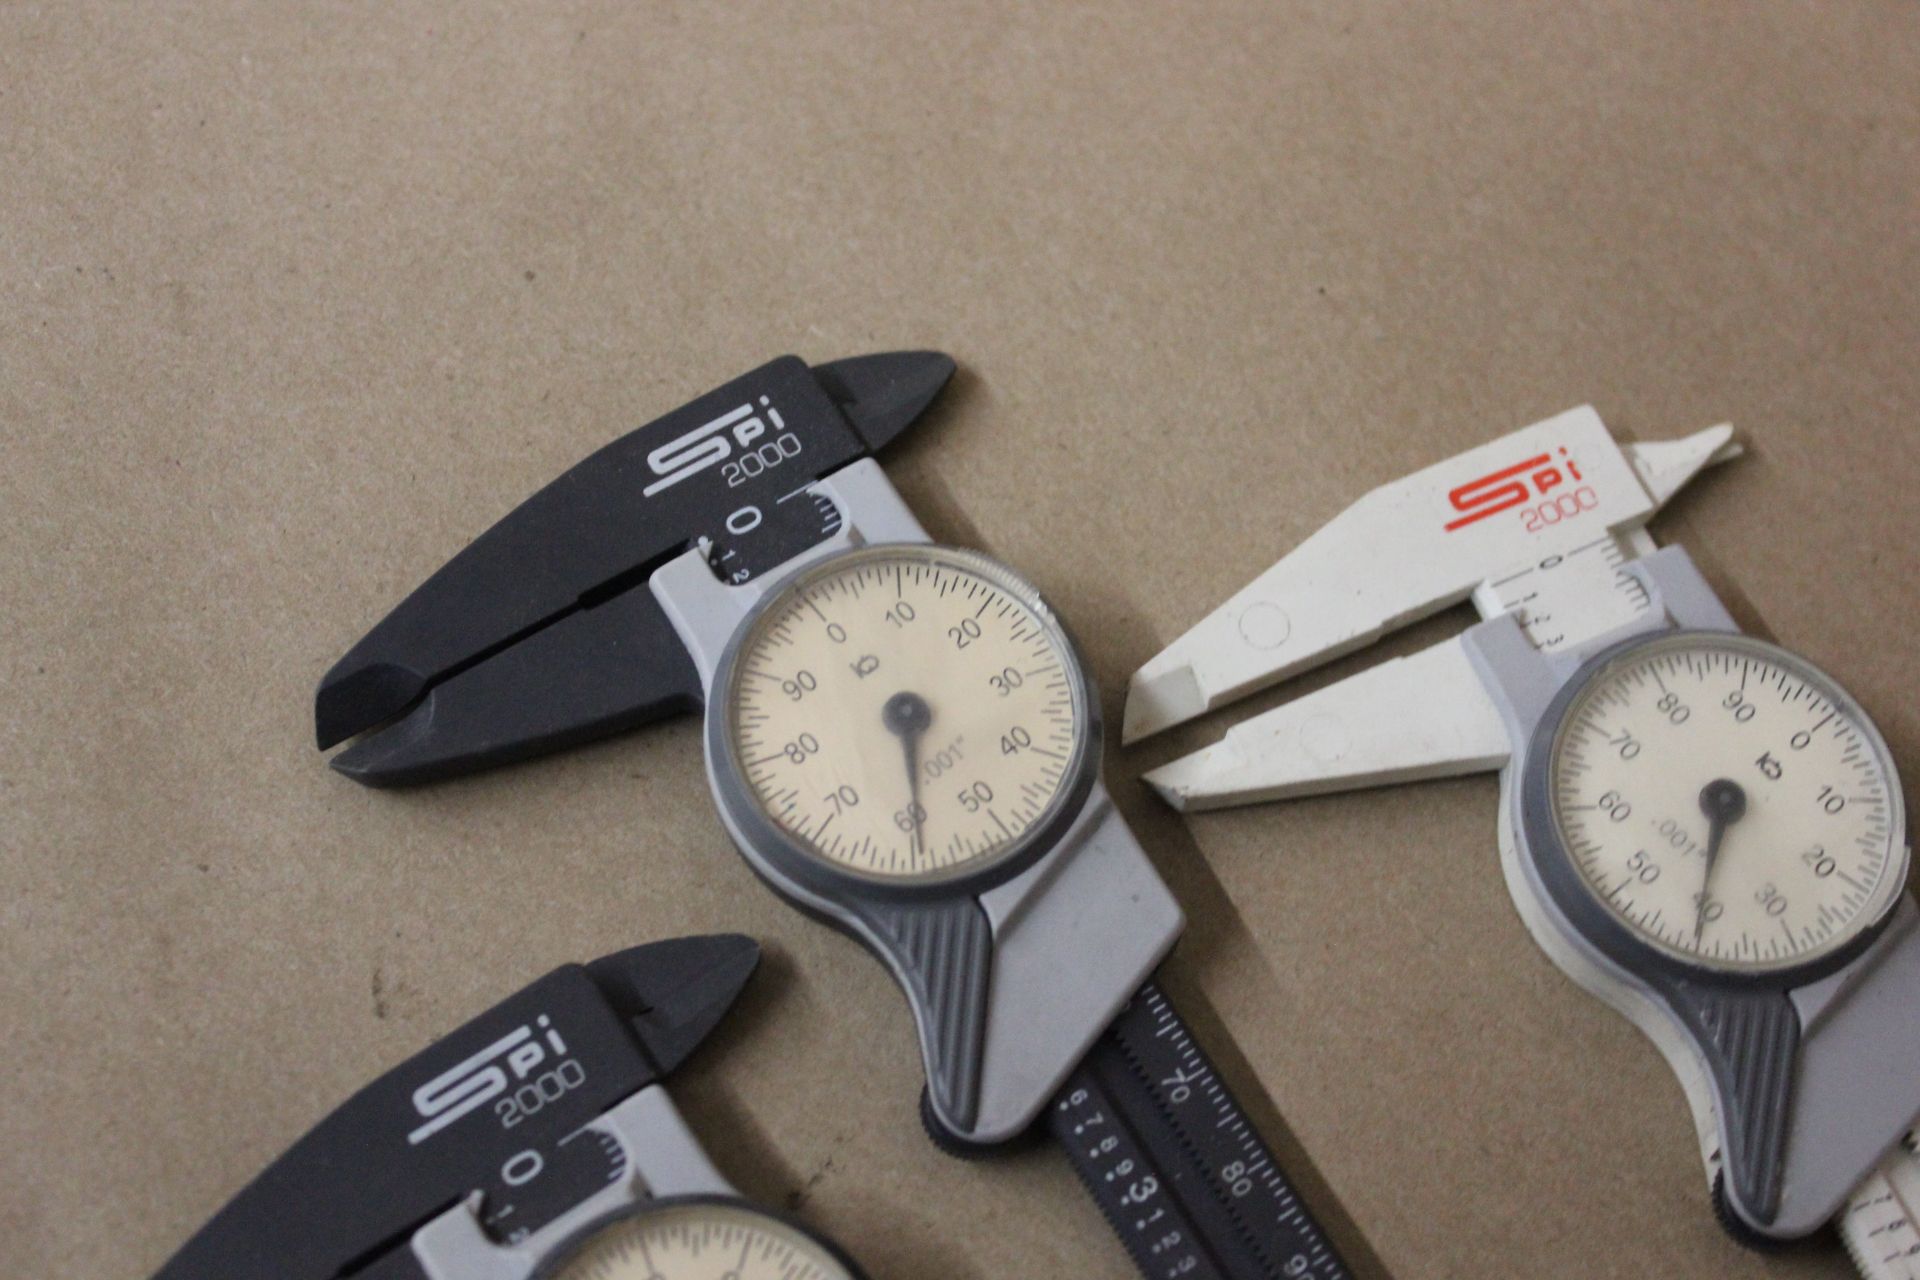 LOT OF SI 2000 DIAL CALIPERS - Image 5 of 7